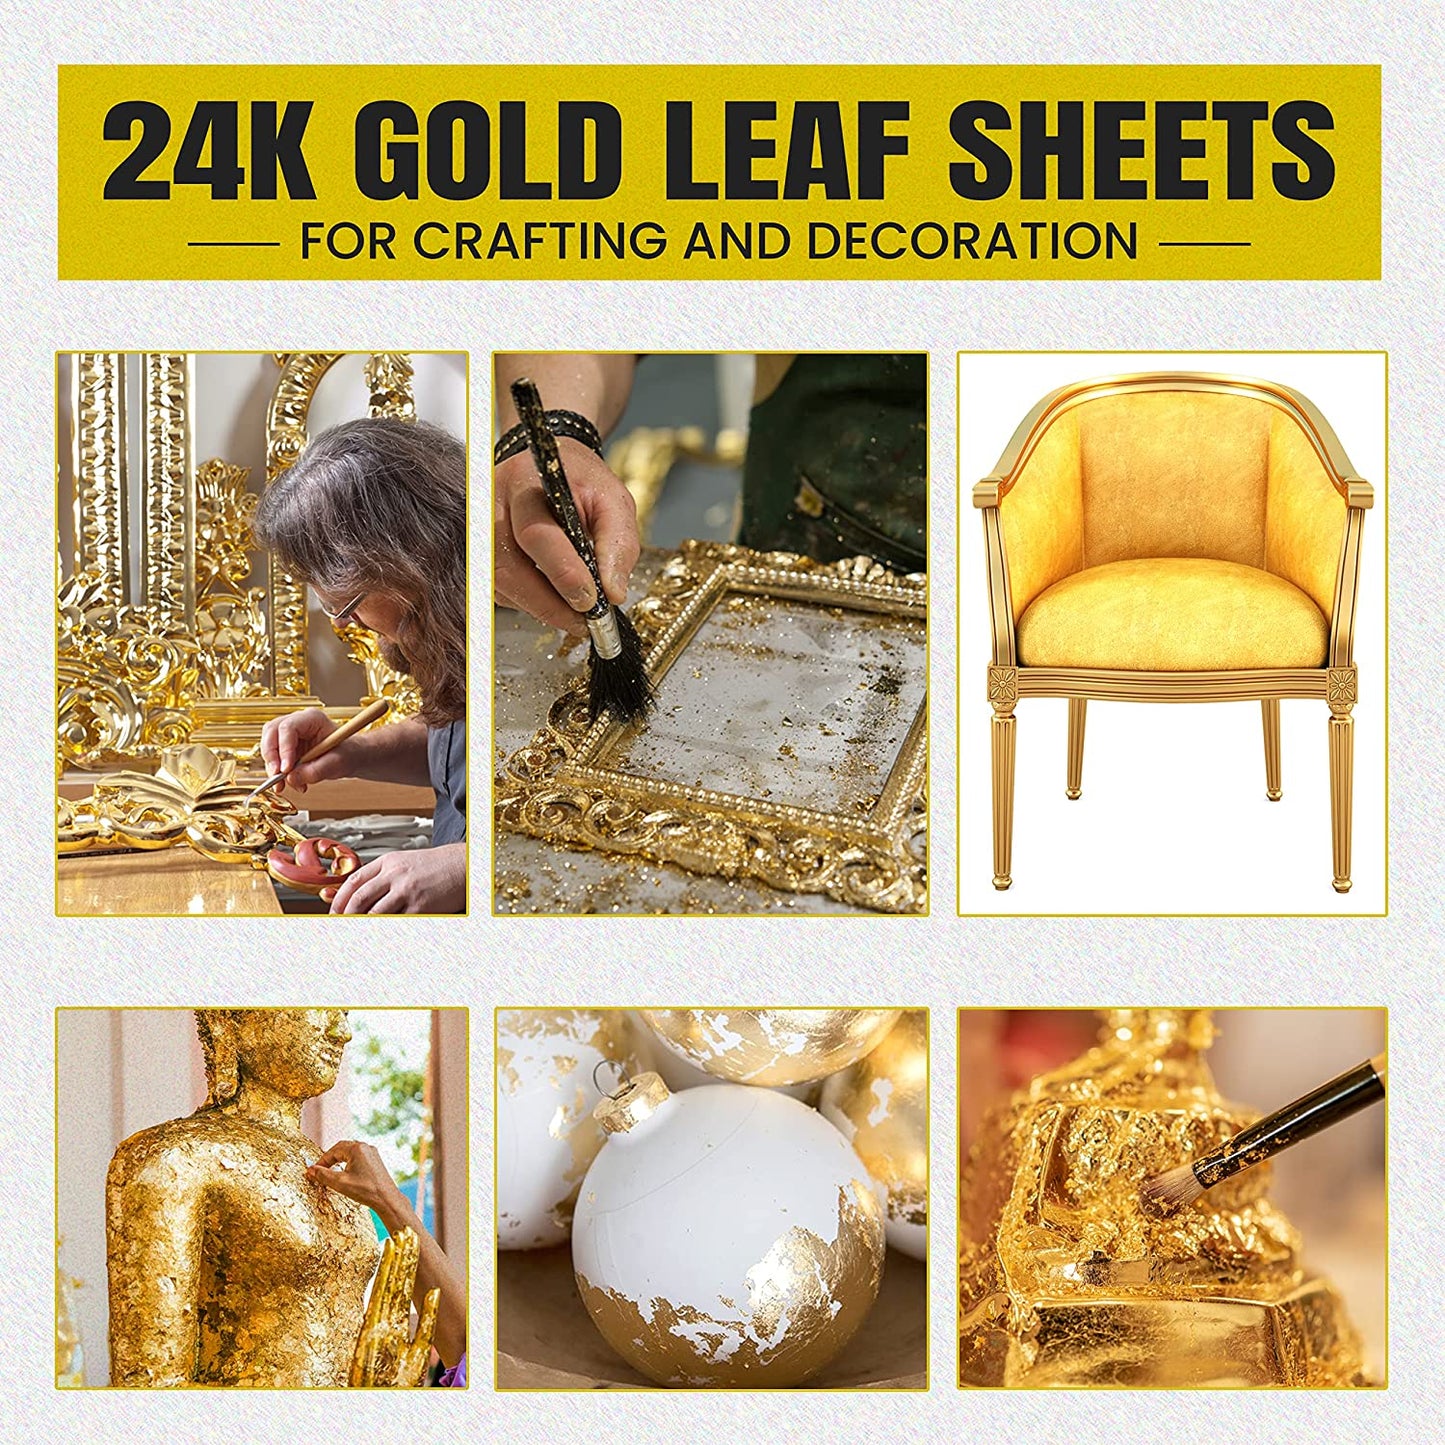 24k Gold Leaf Sheets, 4.33 x 4.33 cm, Pack of 30 Edible Gold Leaf Sheets for Cakes, Desserts, Chocolate, Art and Craft, Face Masks and Nail Art